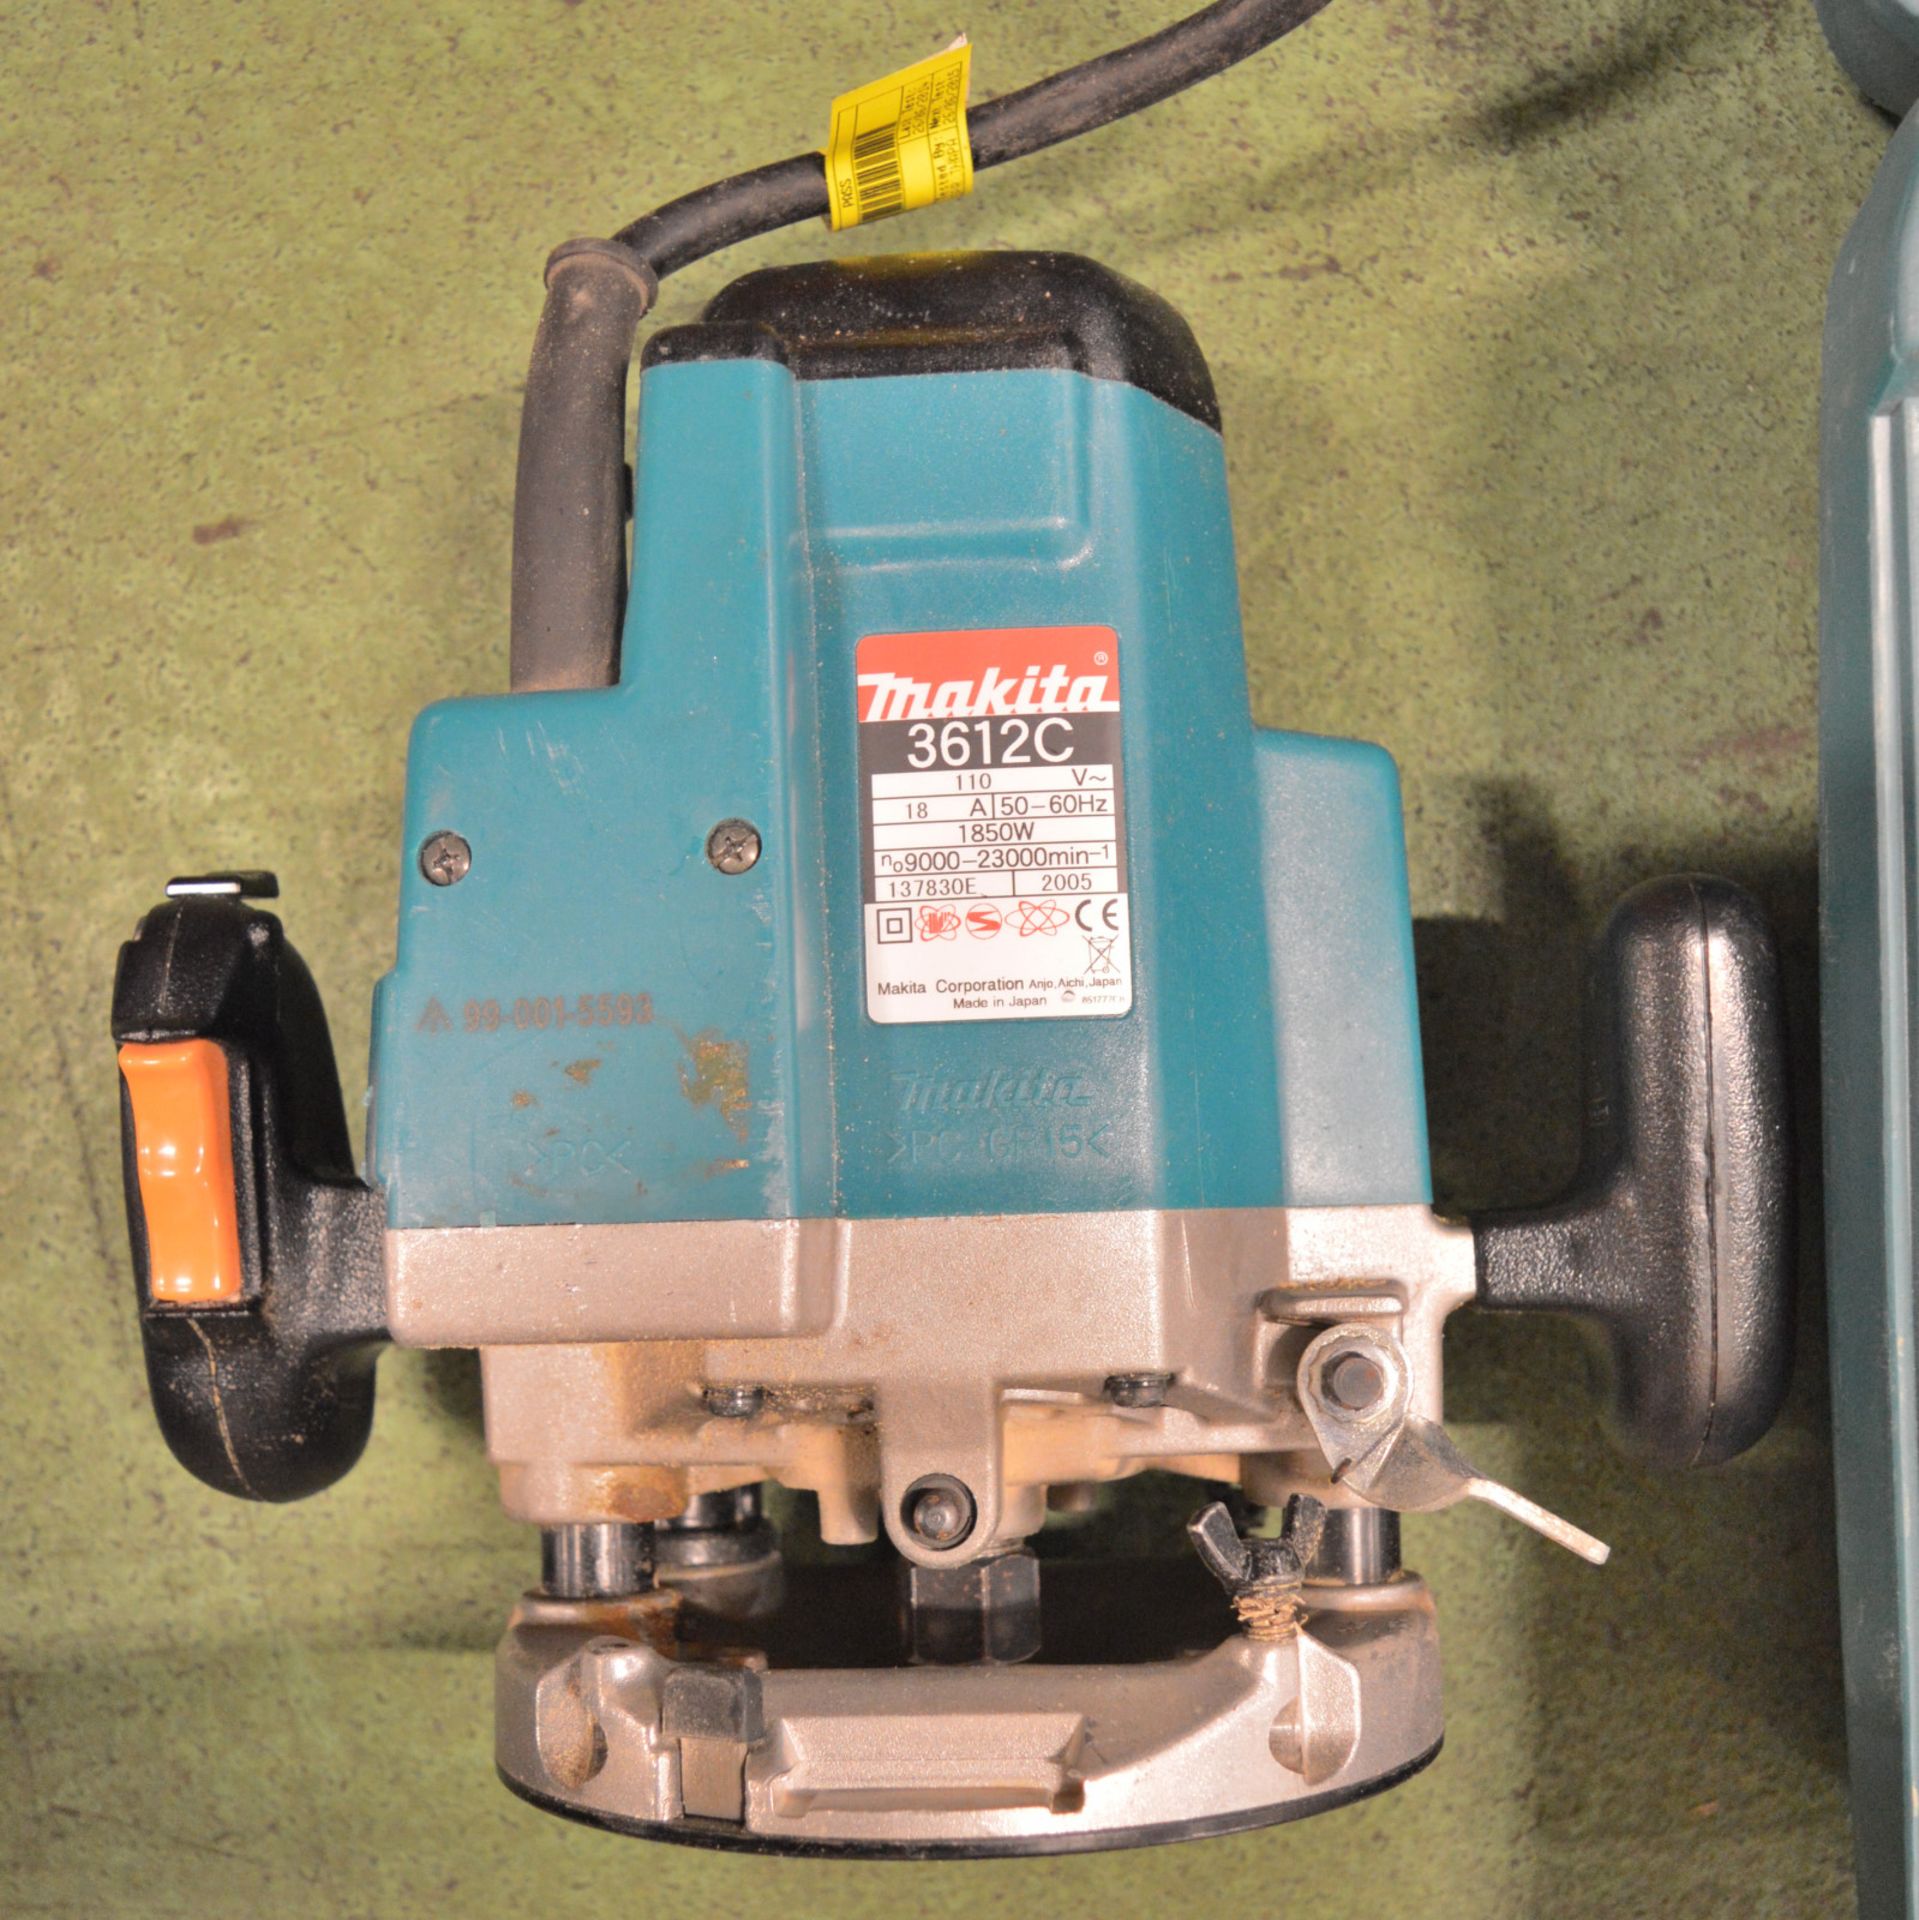 Makita Router 3612C 1850W 110V - With one TCT Cutter. - Image 2 of 2